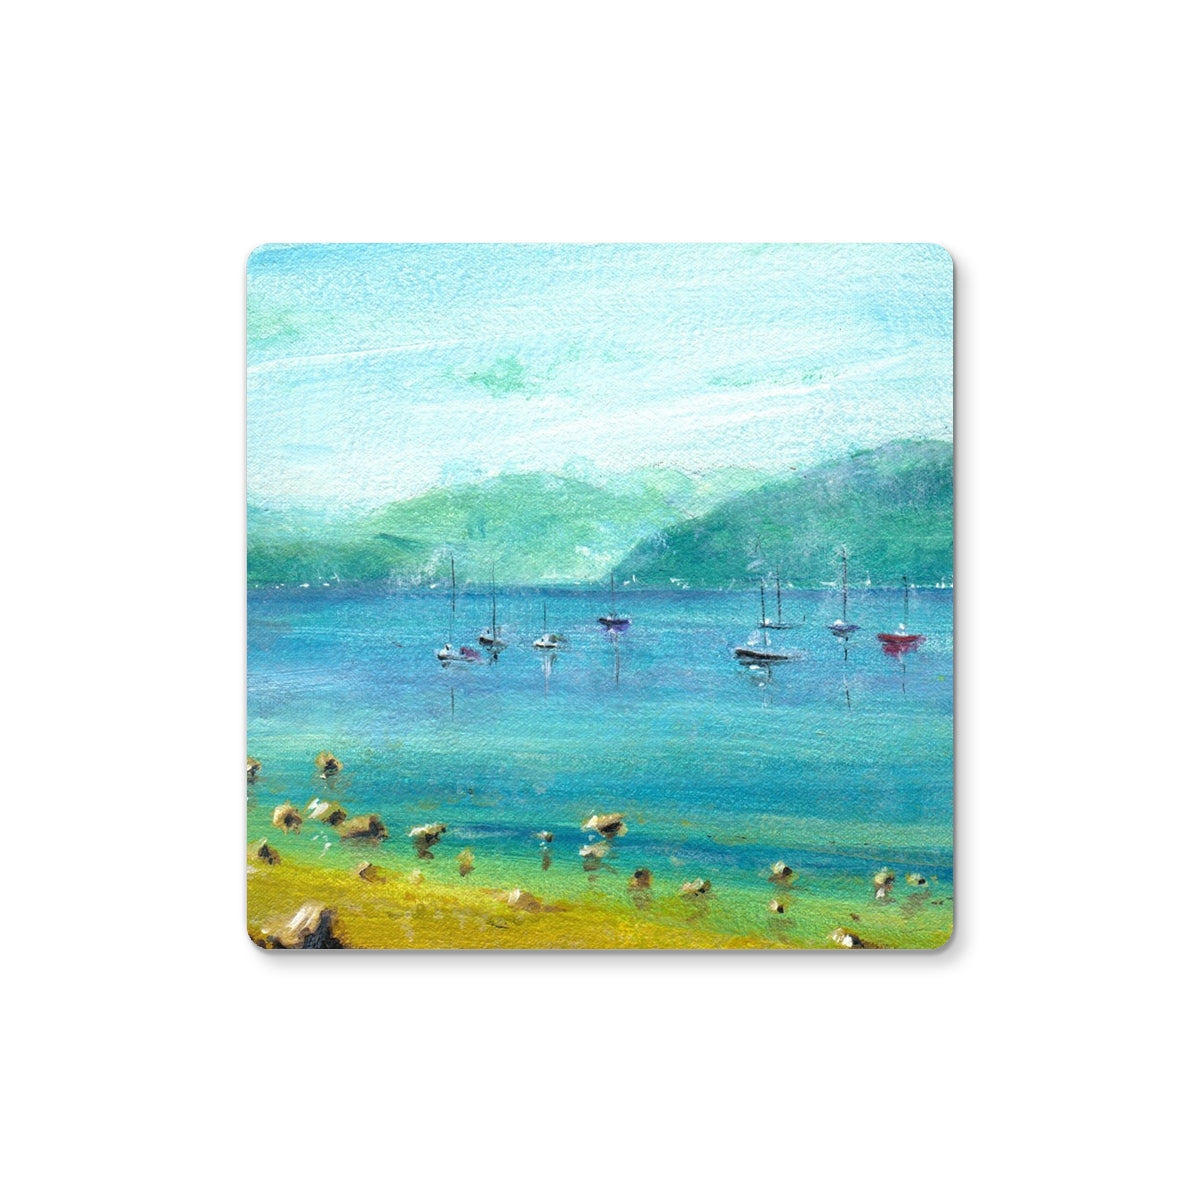 A Clyde Summer Day Art Gifts Coaster-Coasters-River Clyde Art Gallery-2 Coasters-Paintings, Prints, Homeware, Art Gifts From Scotland By Scottish Artist Kevin Hunter